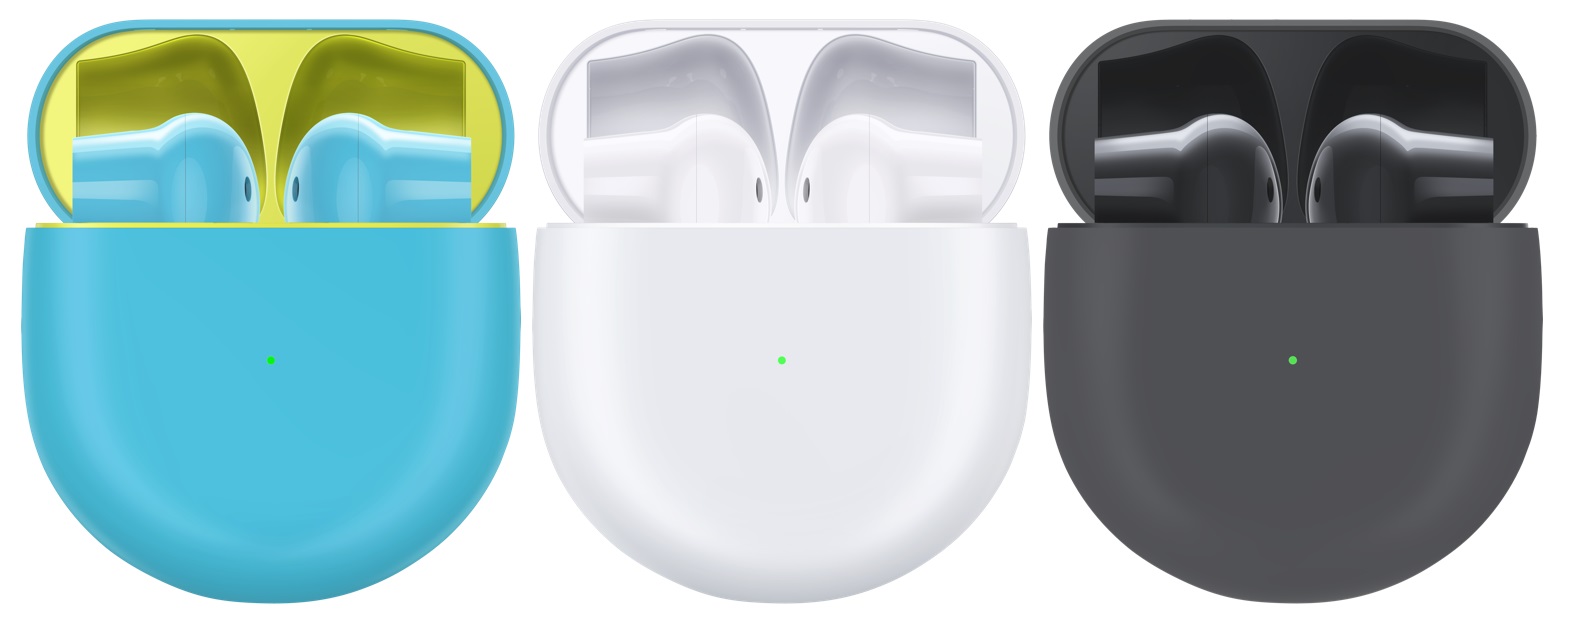 OnePlus Buds earbuds design leak colors